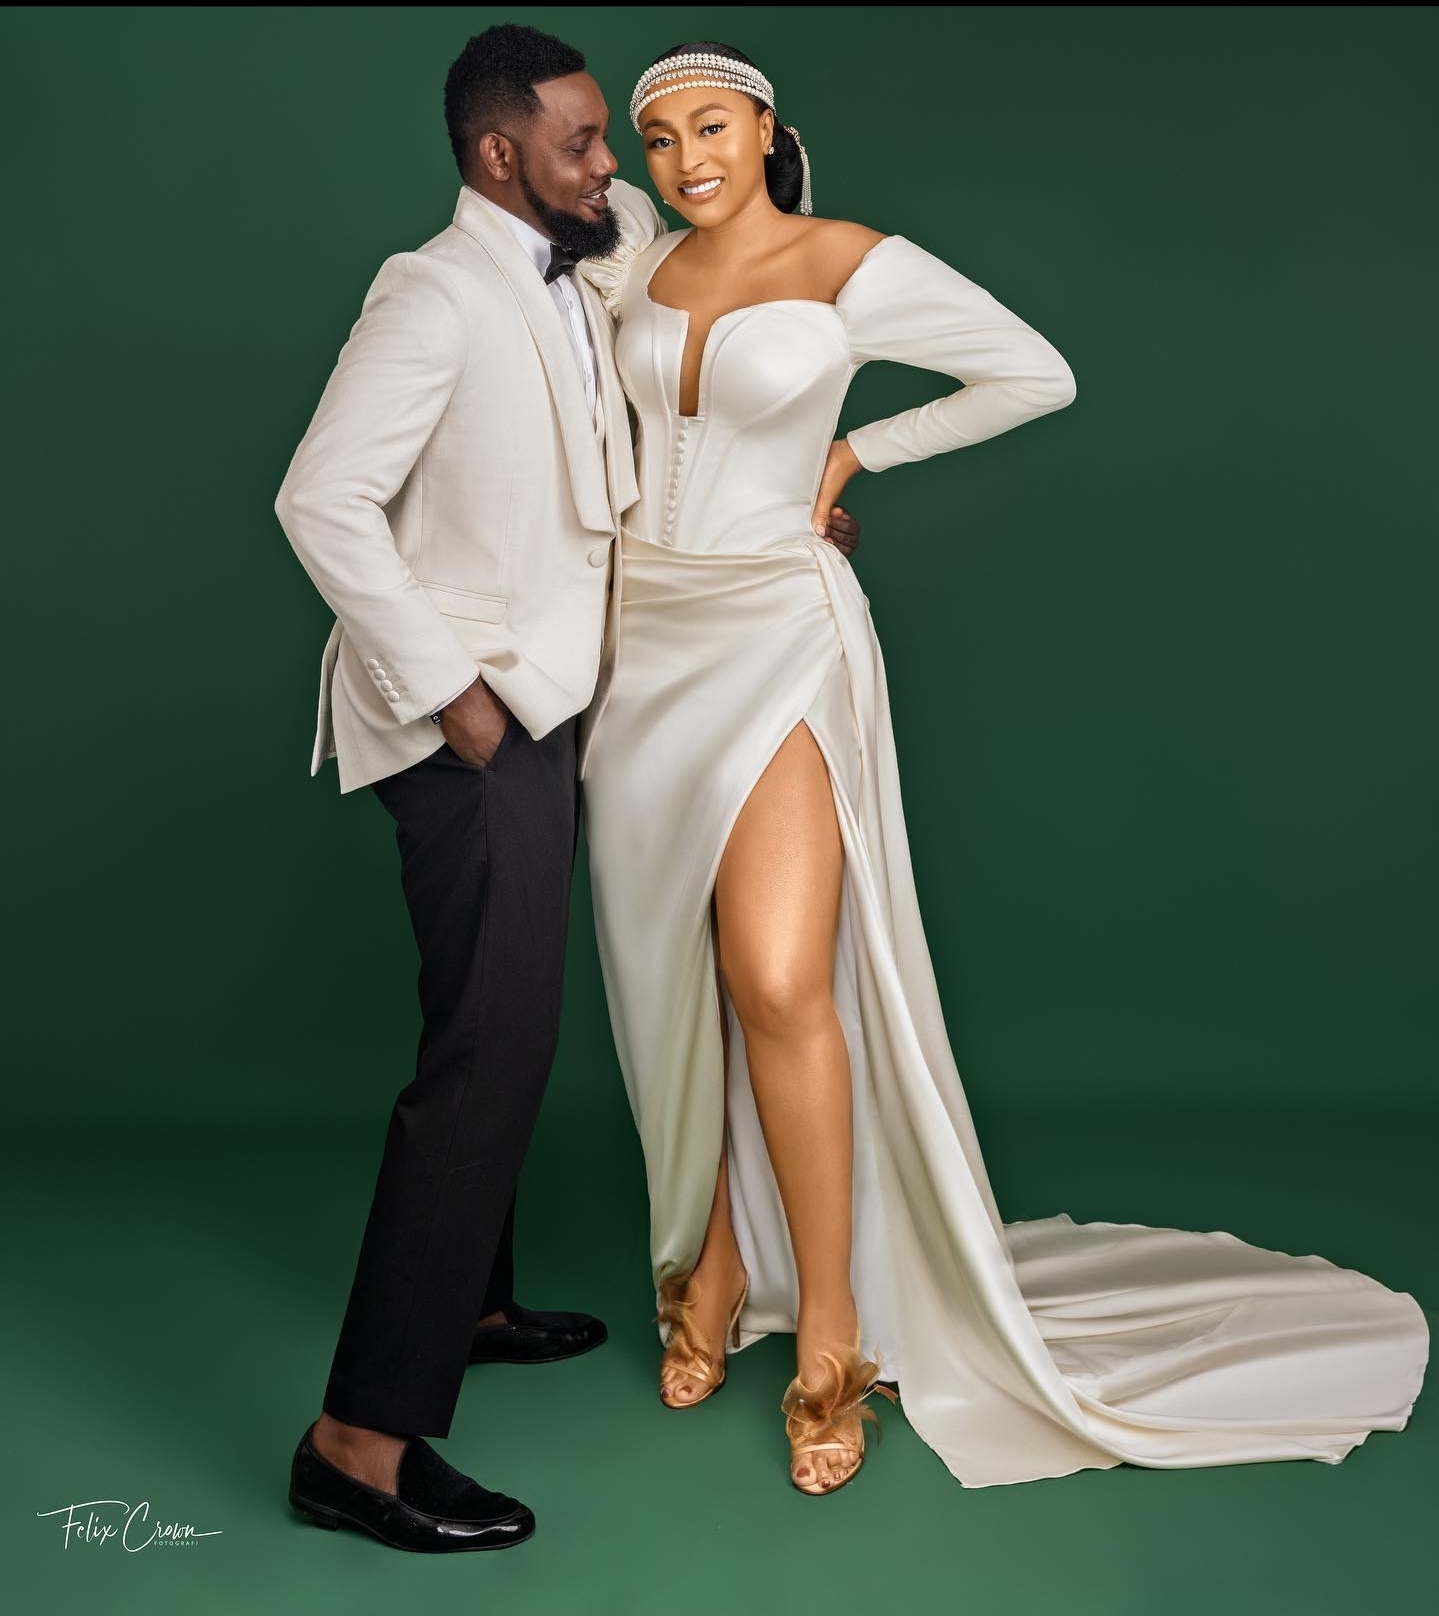 AY The Comedian Welcomes Second Child With Wife After 13years